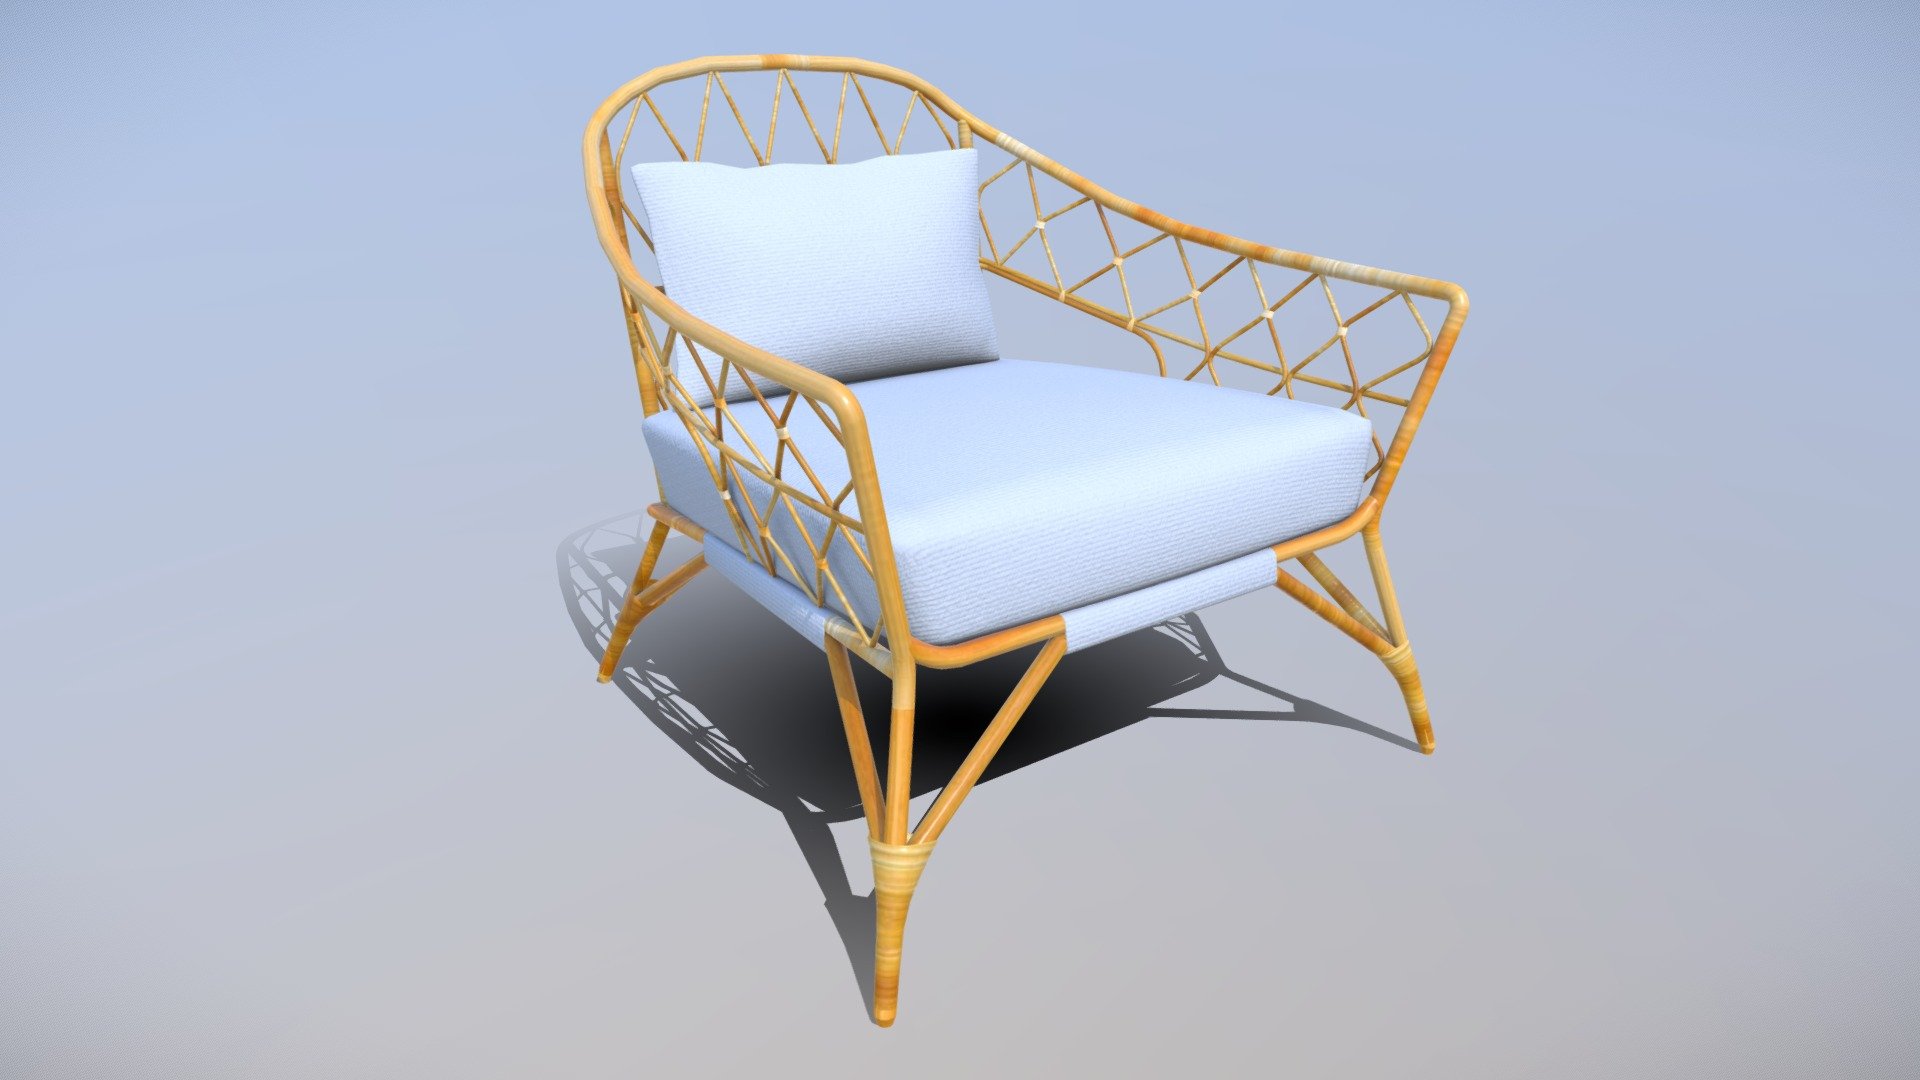 StockHolm IKEA Rattan Chair 3d model ready for Virtual Reality (VR), Augmented Reality (AR), games and other real-time apps.

3dmax 2017 unwrap, textures developed in Substance Painter FBX-OBJ-DAE - 3DS - Sketchup Ambient Oclusión Map

Geometry Polygon mesh
Polygons 21,587
Vertices 11,737 - StockHolm IKEA Rattan Chair Low-poly - Buy Royalty Free 3D model by ArqRafaelLugo (@rafaelugo20) 3d model